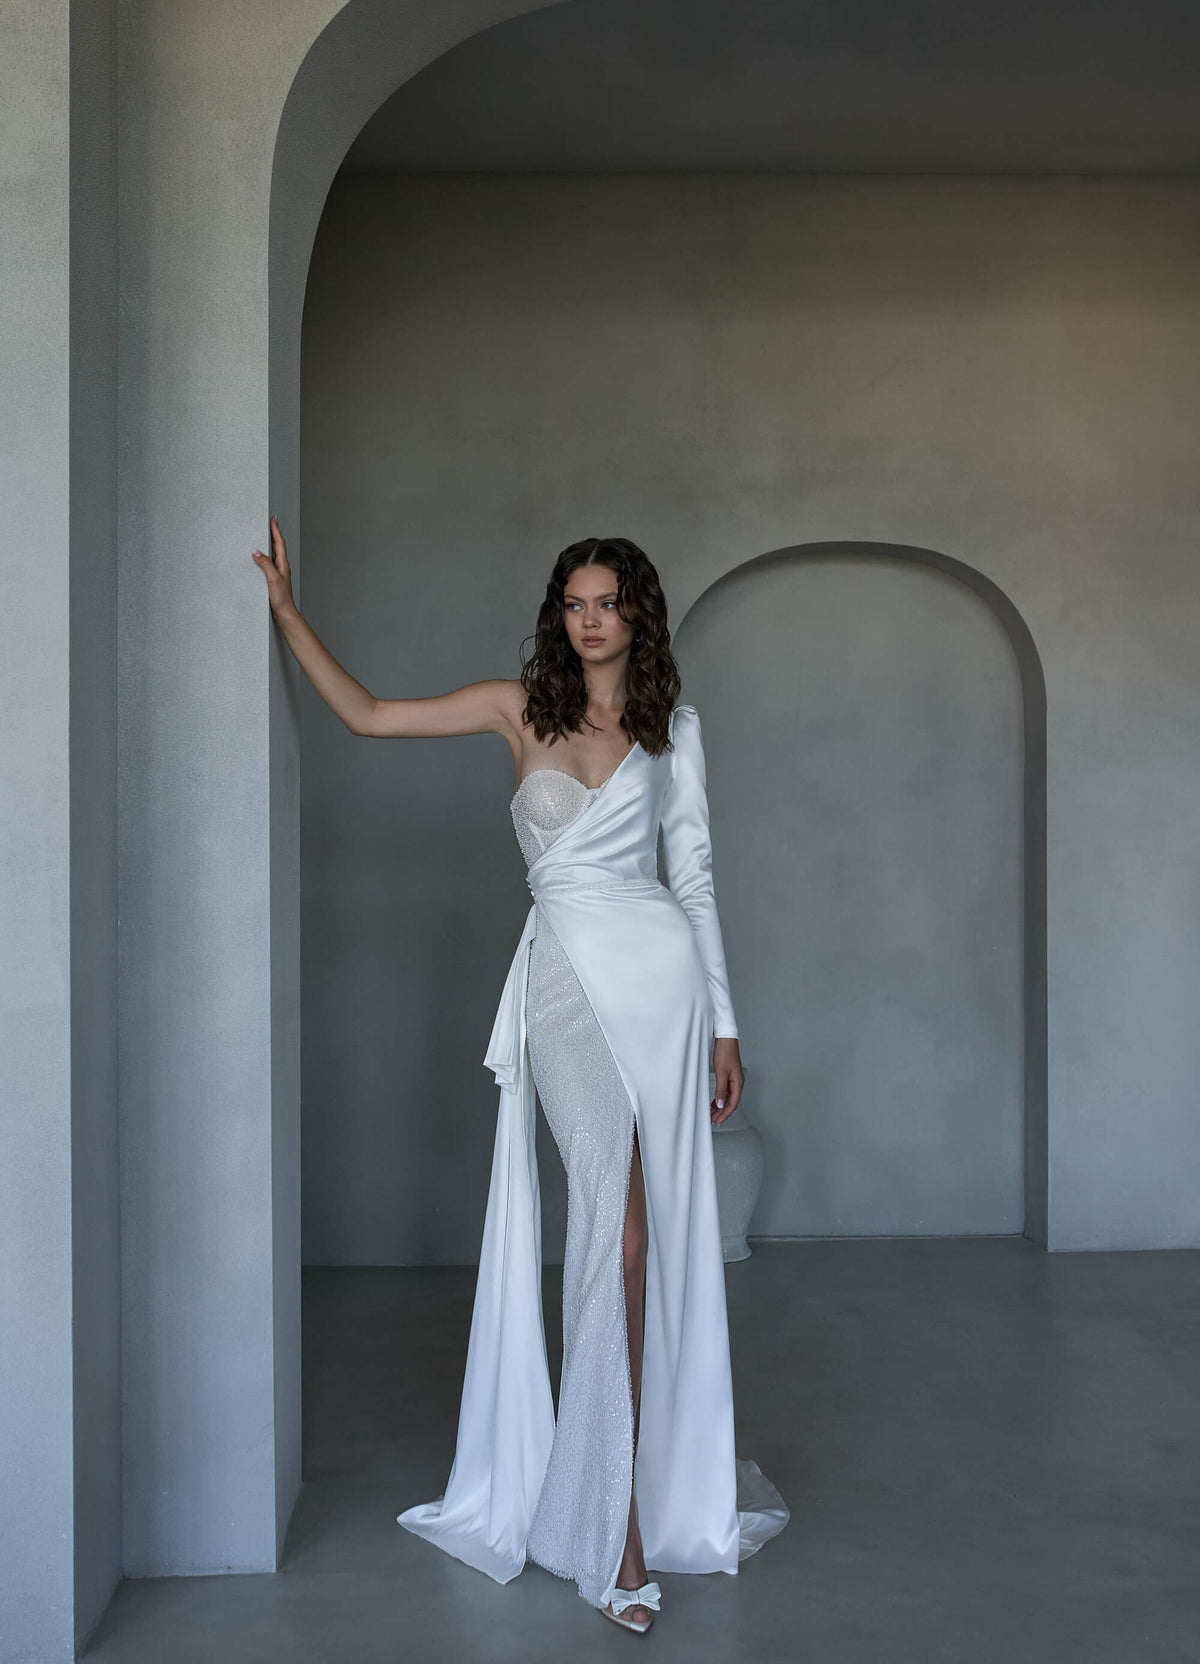 Spectacular and Sexy Mermaid Wedding Dress Bridal Gown One Shoulder Asymmetrical Cut Sparkle Front Slit 2 Fabrics Modern Style